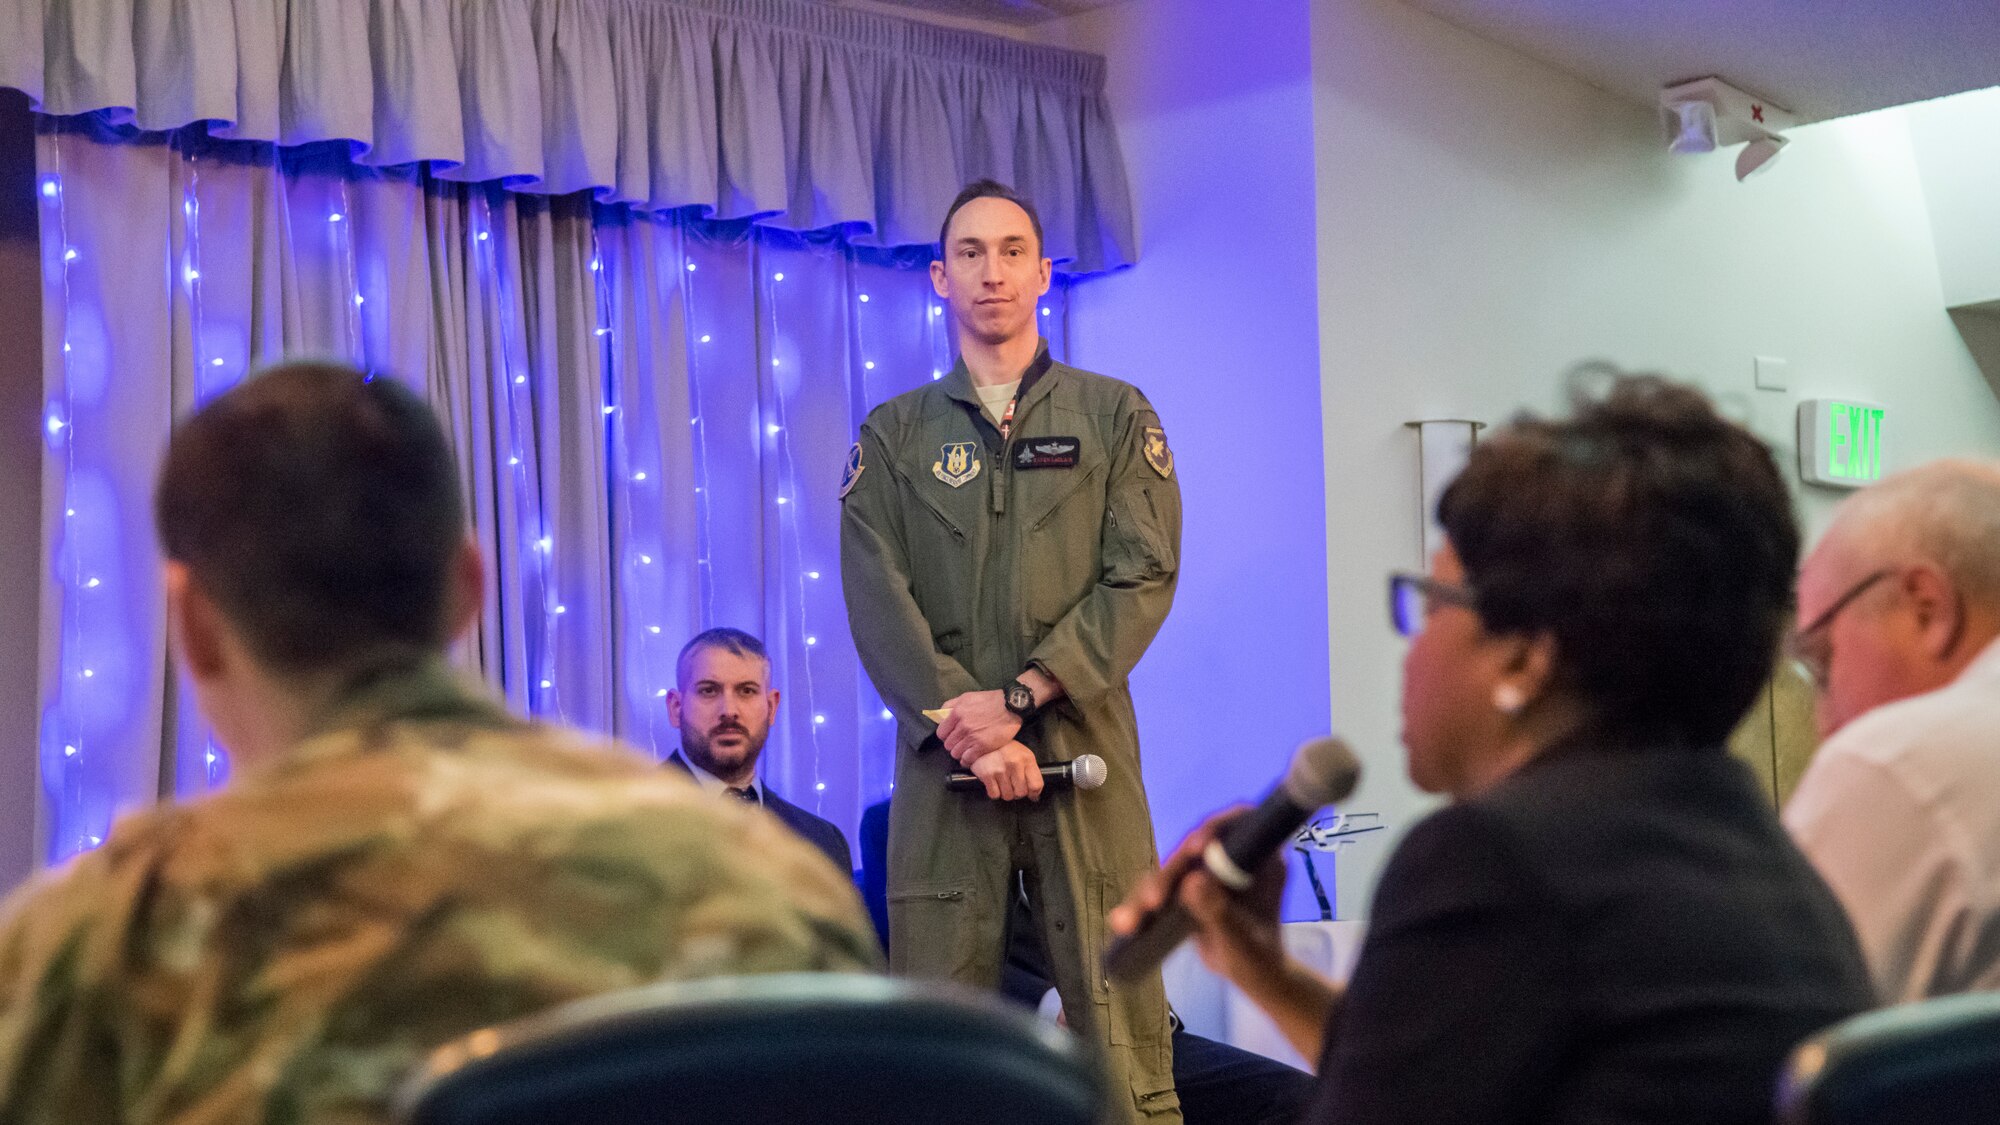 Lt. Col. Raven LeClair, 370th Flight Test Squadron and F-35 JSF, fields questions from a panel of six judges during the Spark Tank Innovation Showcase event at Edwards Air Force Base, California, Jan. 29. (Air Force photo by Giancarlo Casem)